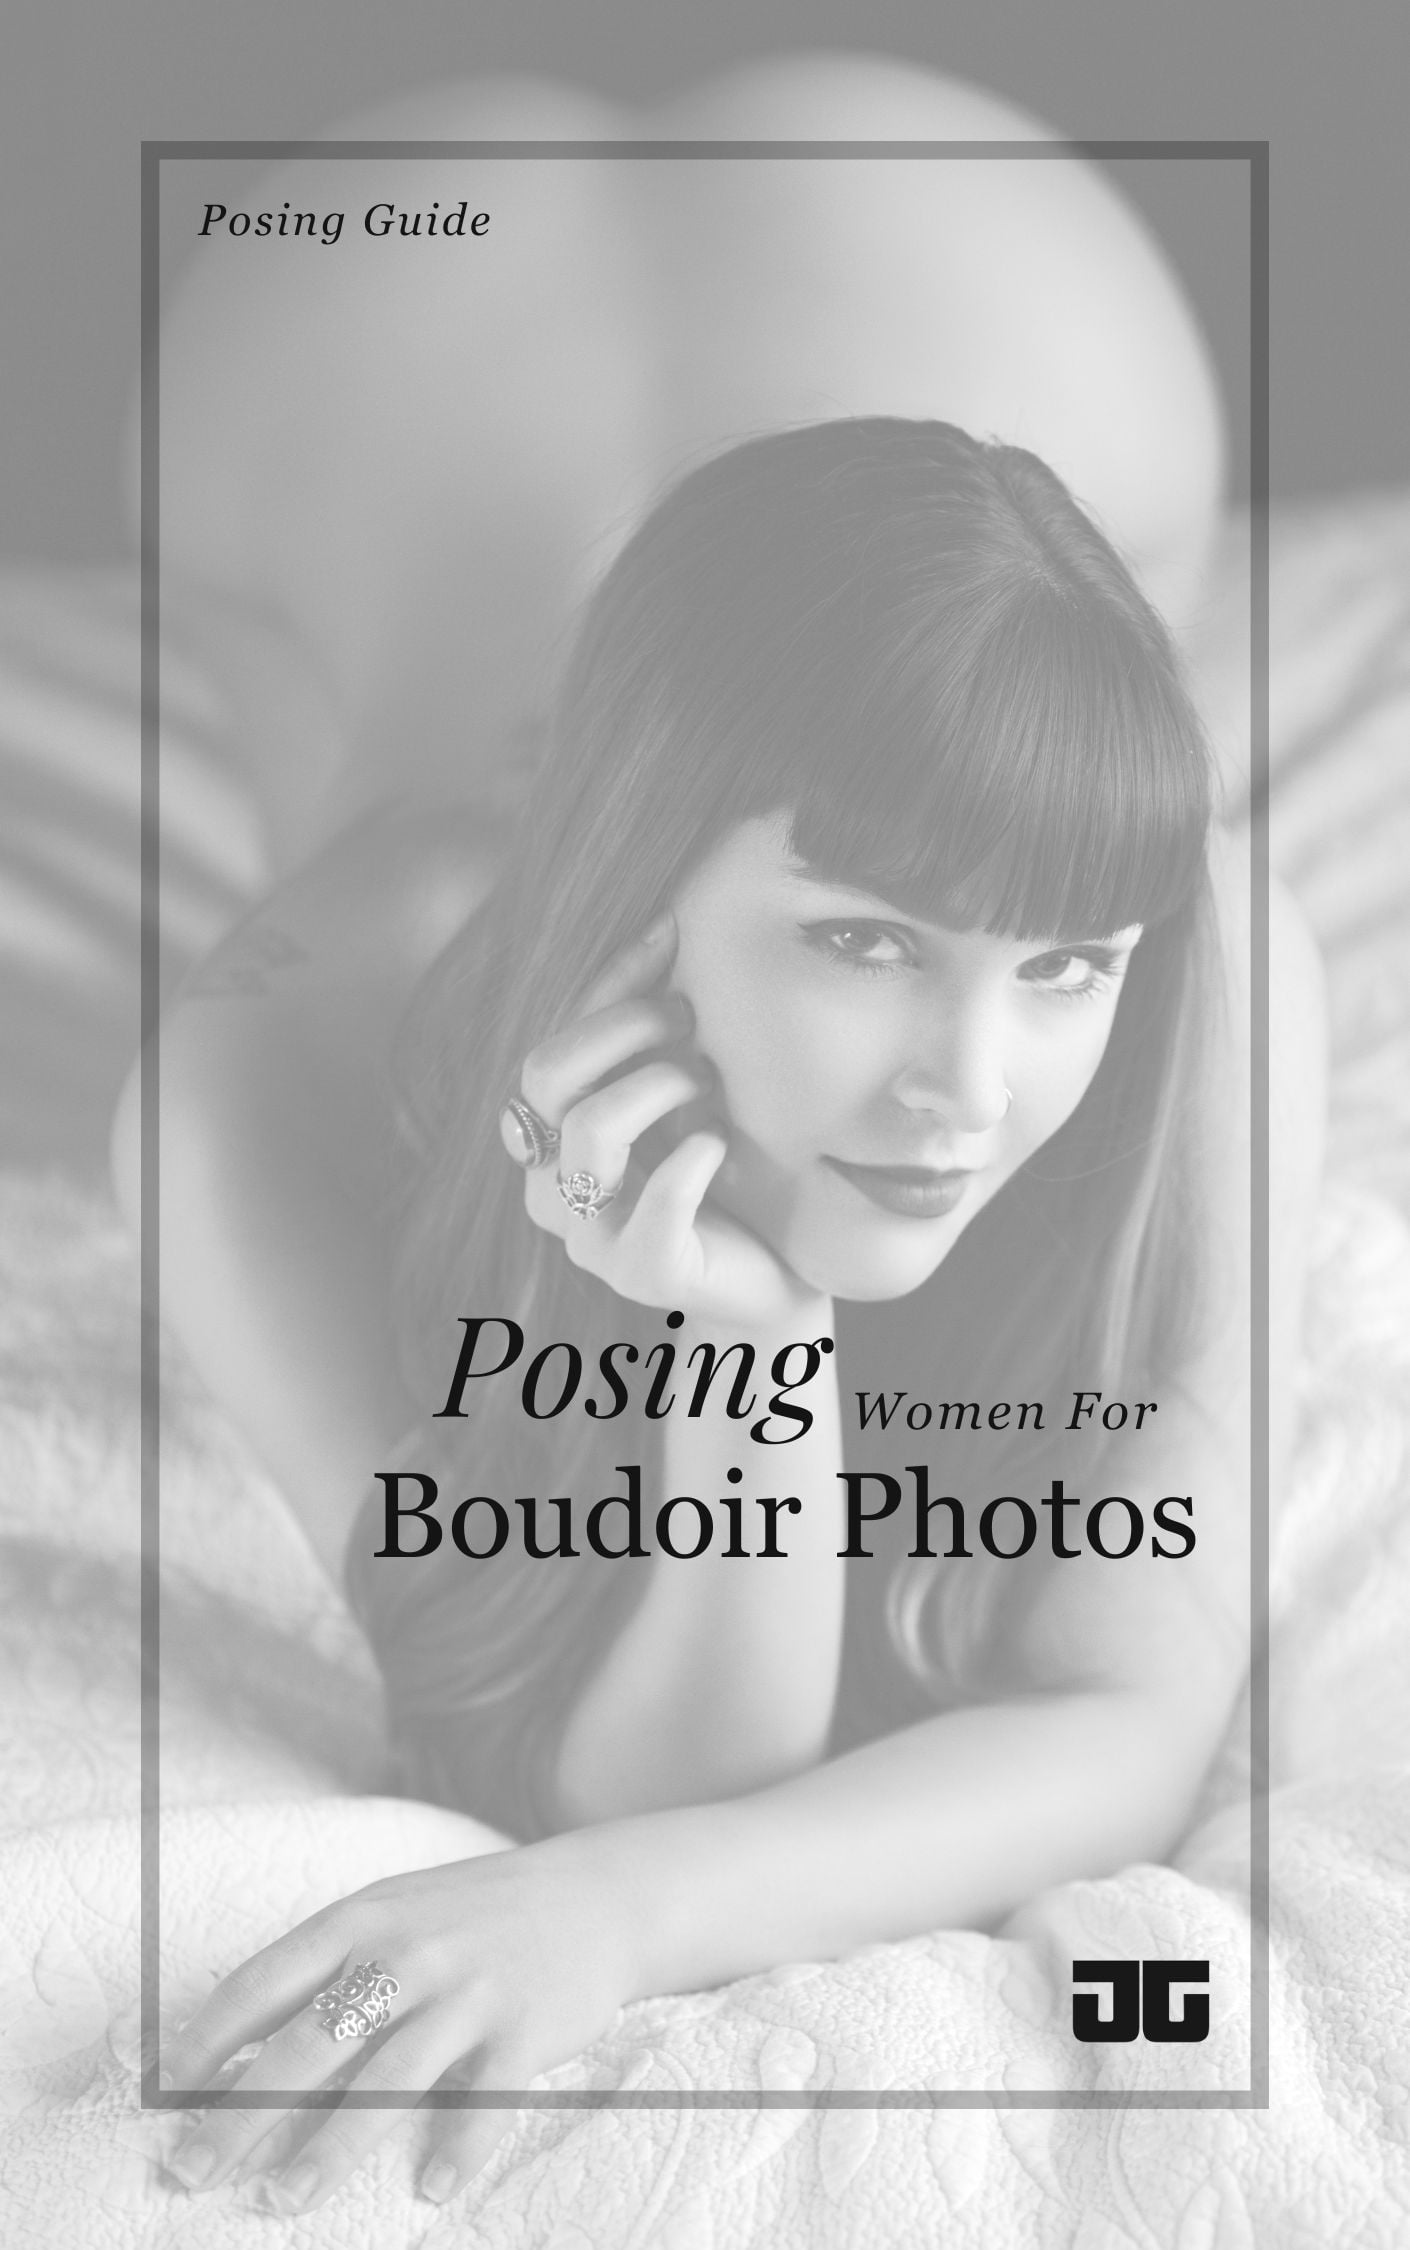 Basic posing tips for women #photography #photographytutorial #posingtips # posing #photographytipsandtricks #photography101… | Instagram